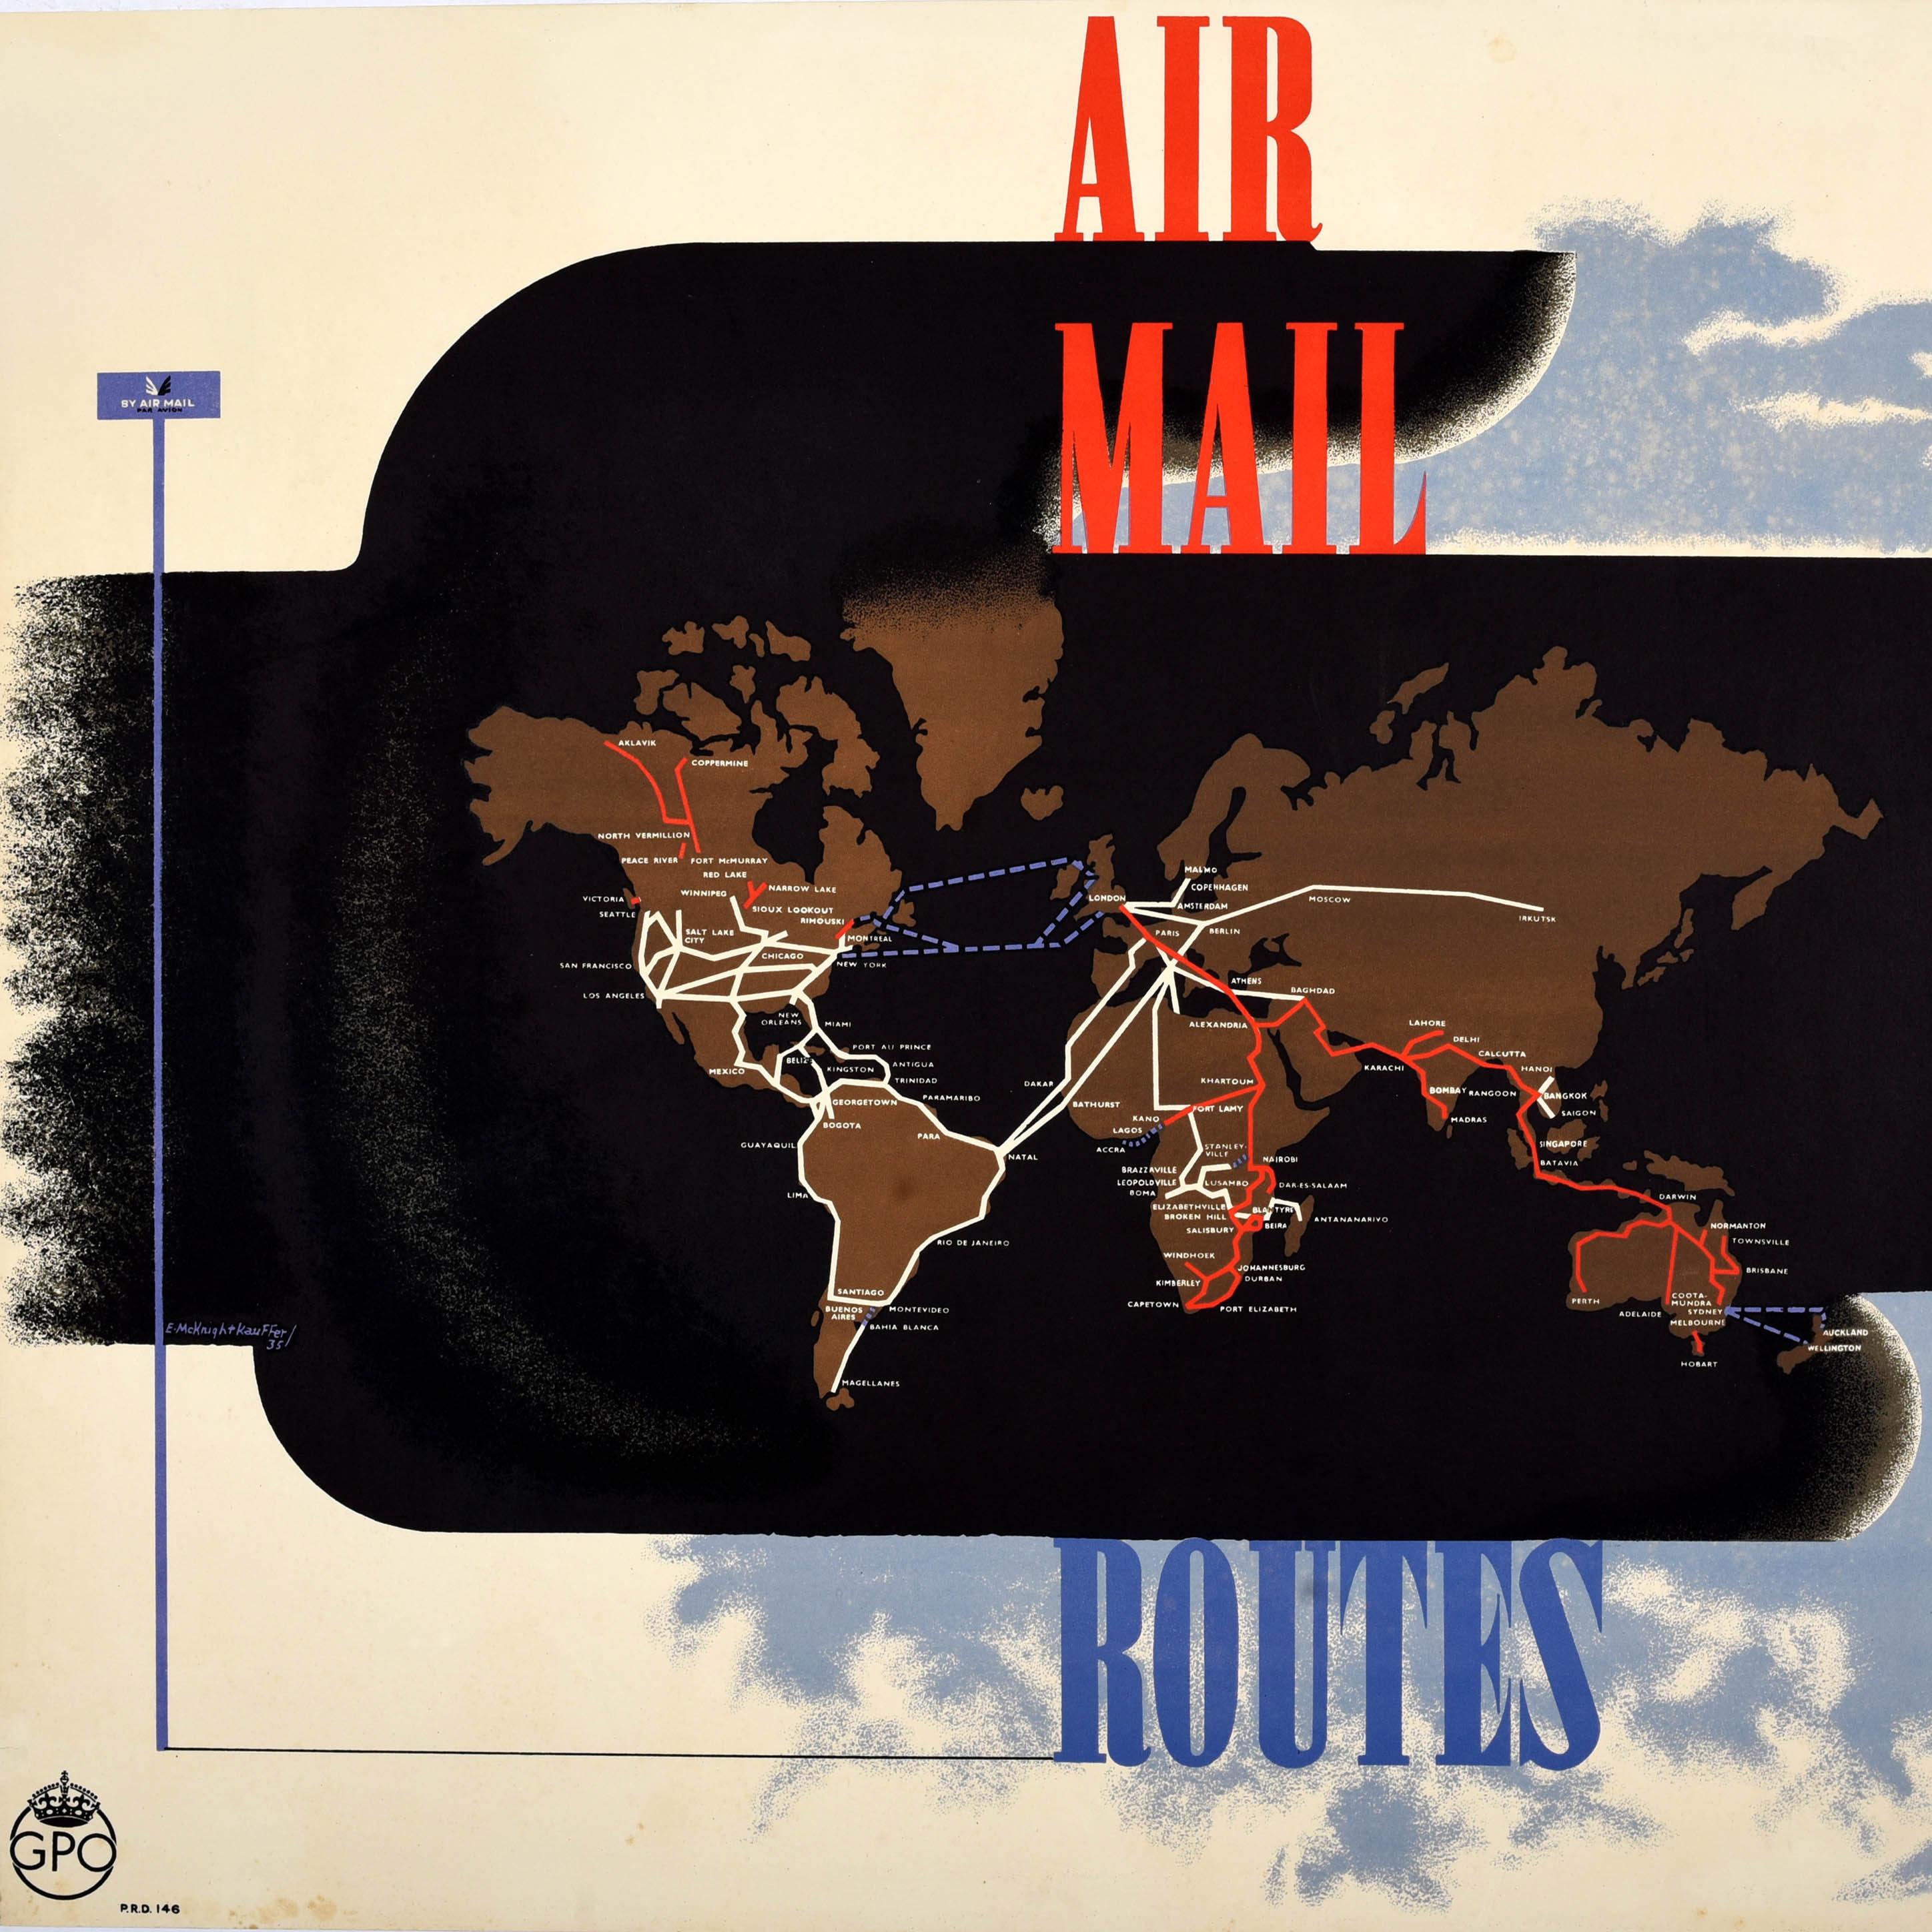 Rare original vintage advertising poster for the GPO General Post Office - Air Mail Routes - featuring a great design by the notable artist Edward McKnight Kauffer (1890-1954) showing the worldwide air mail routes in red, white and blue connecting